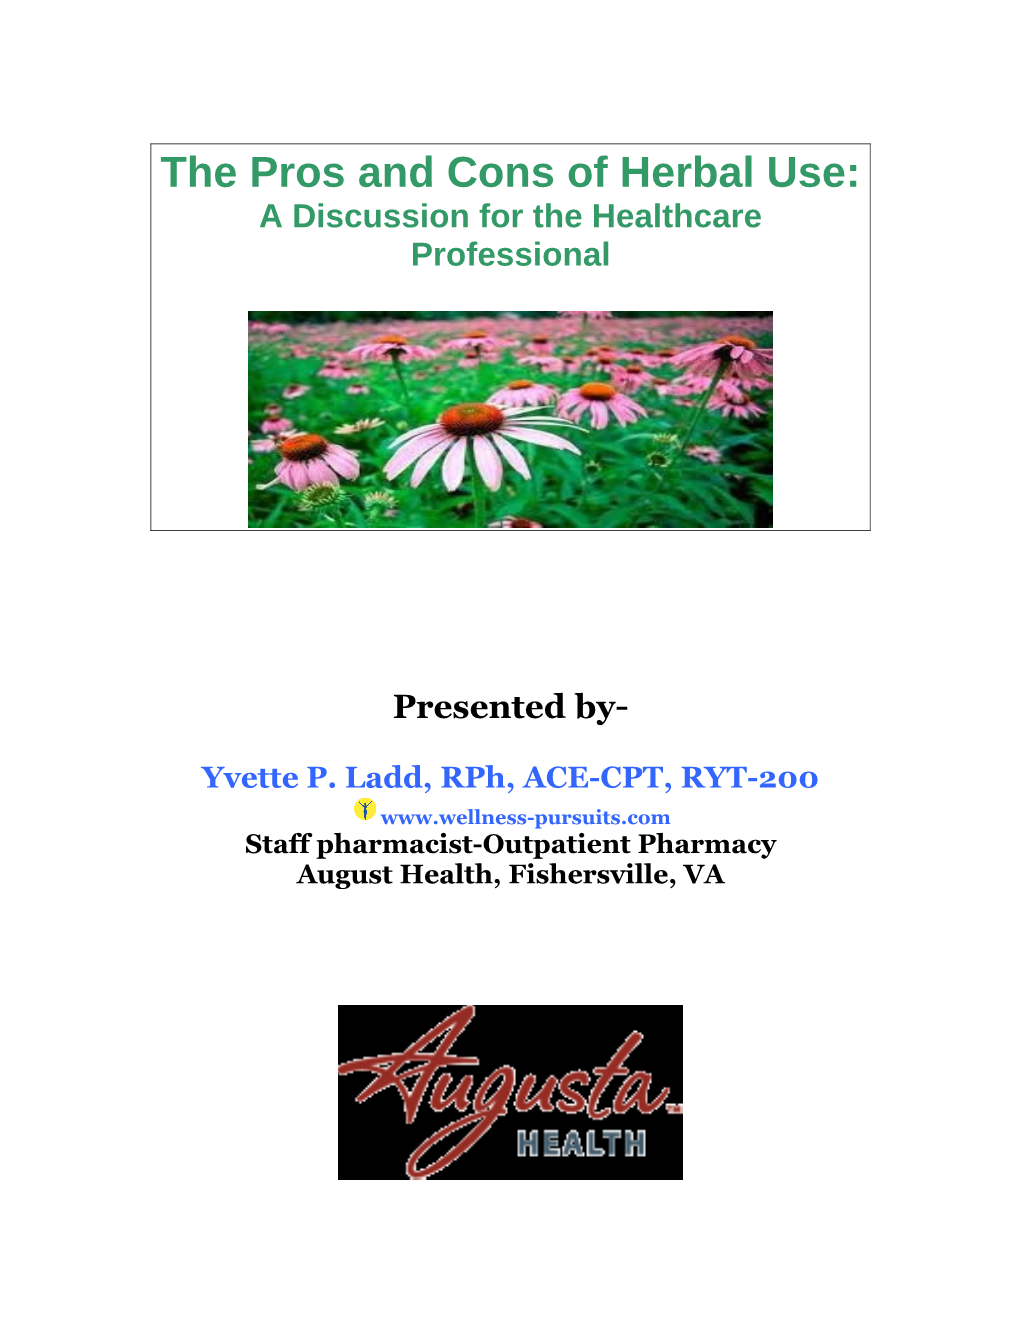 The Pros and Cons of Herbal Use